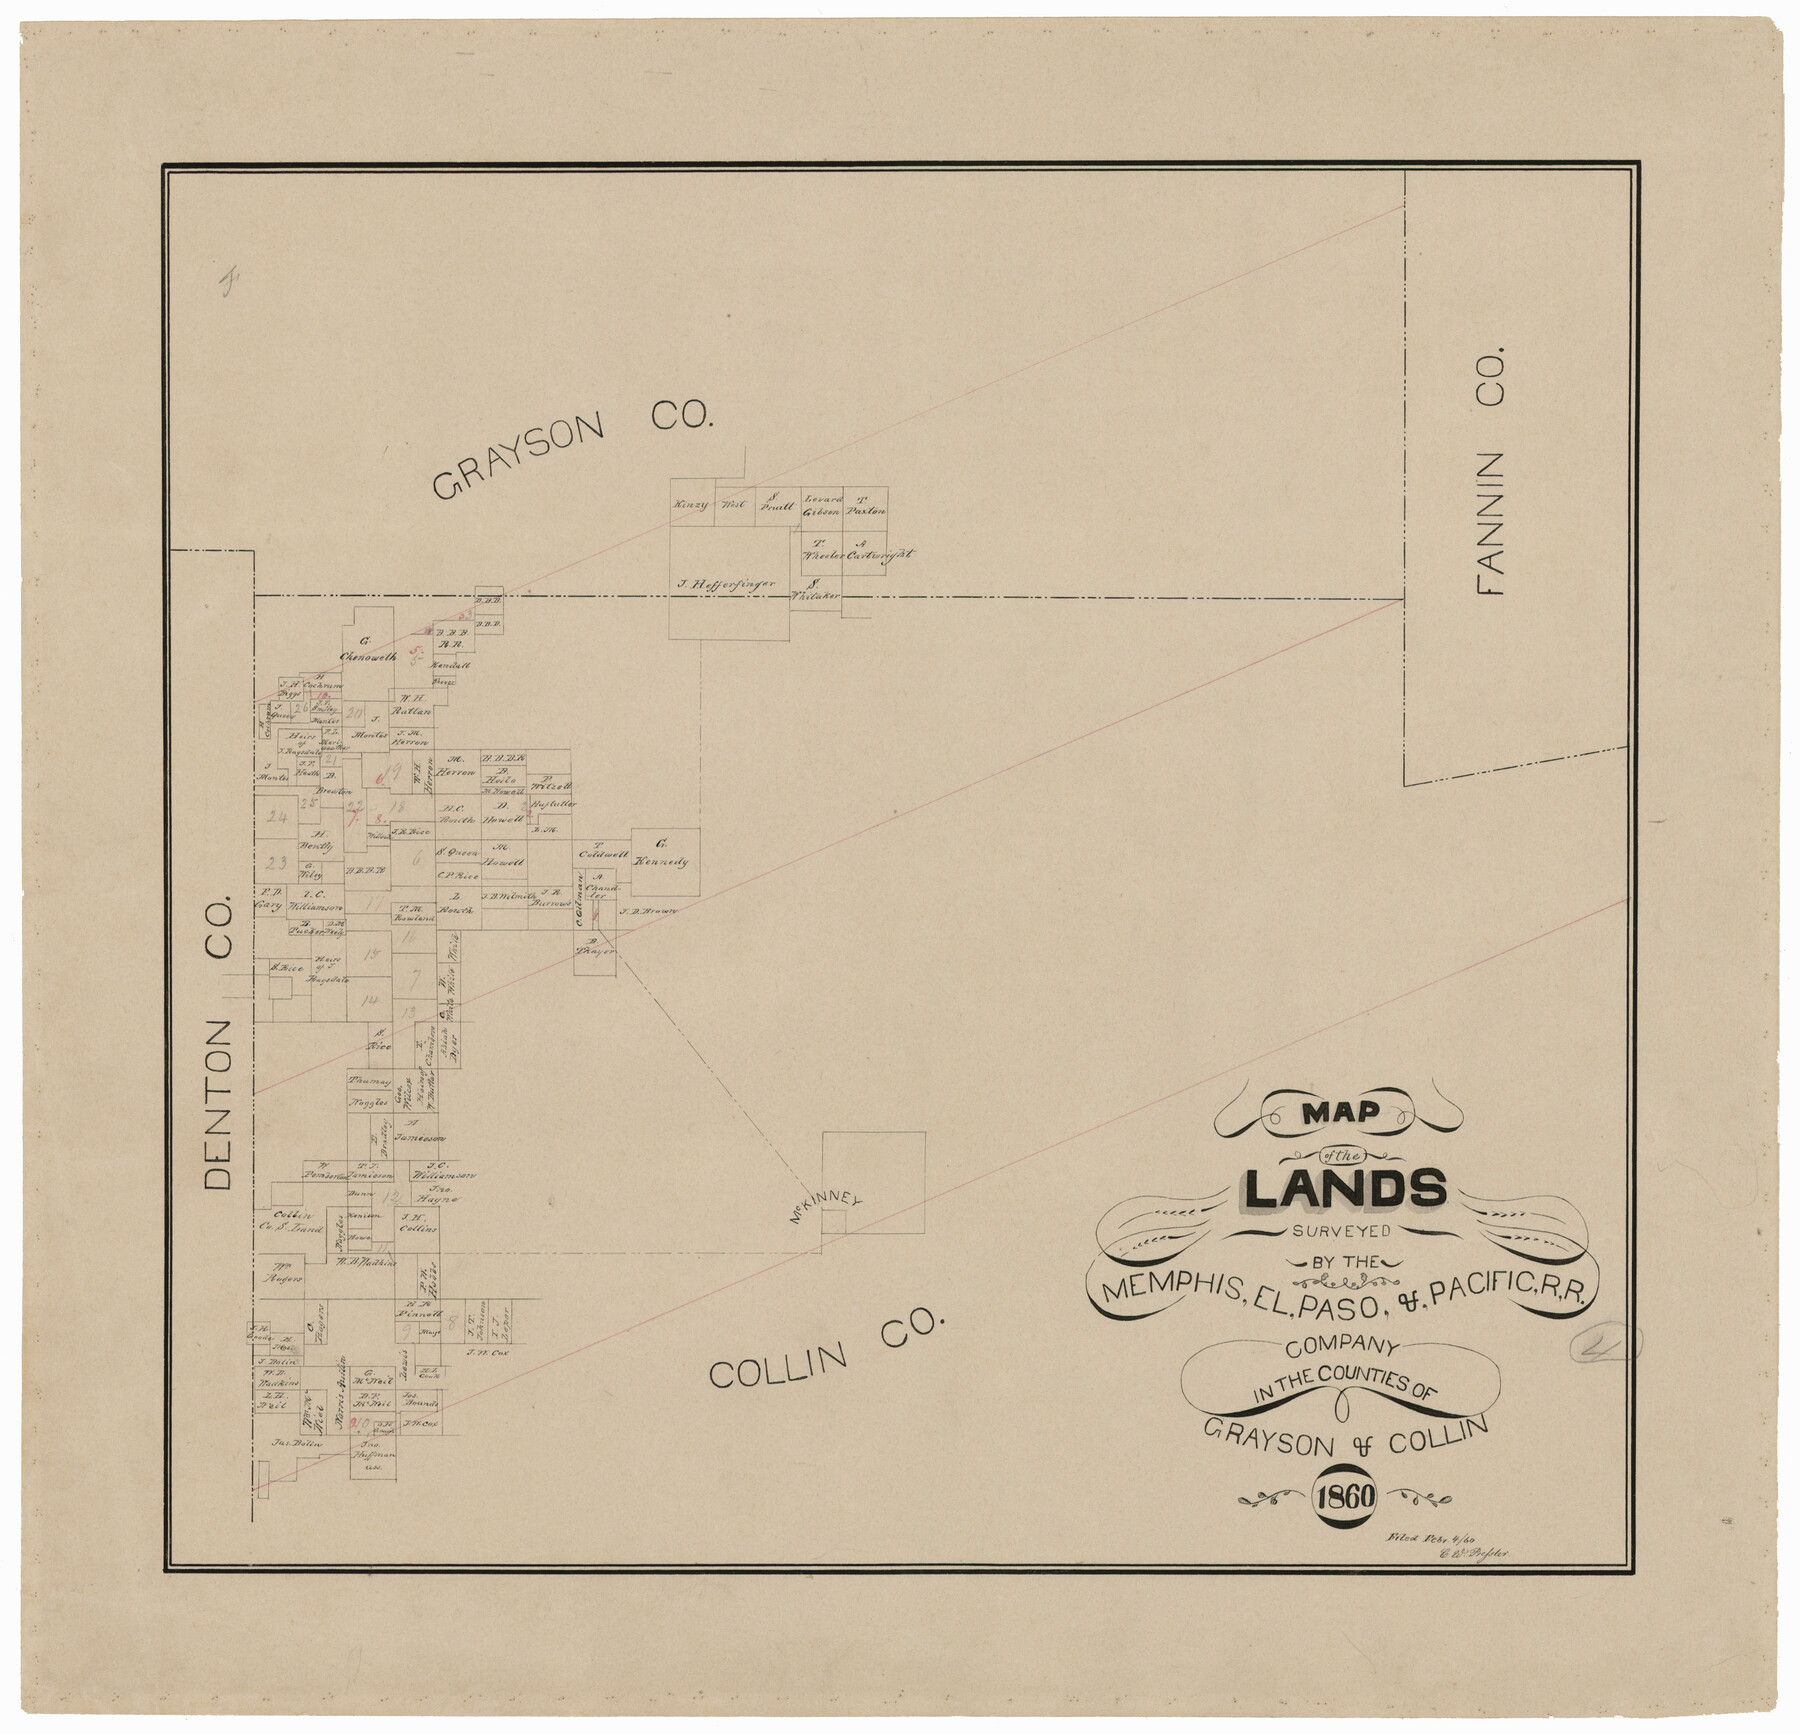 4846, Map of the Lands Surveyed by the Memphis, El Paso & Pacific R.R. Company, General Map Collection